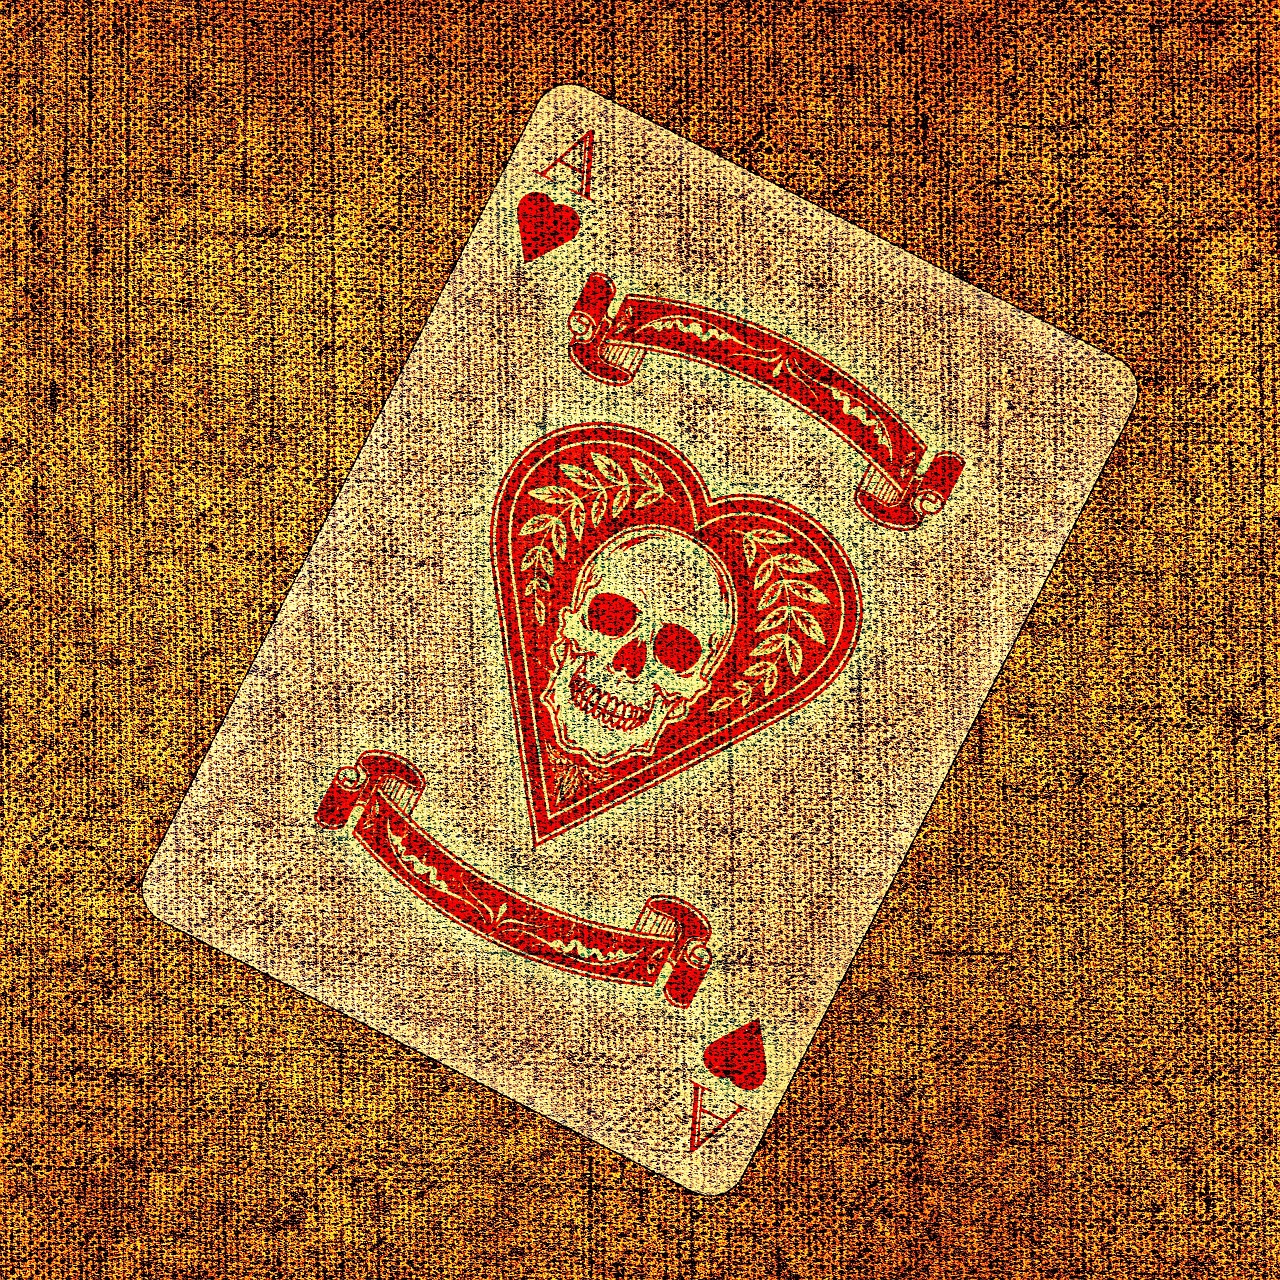 playing card ace heart free photo